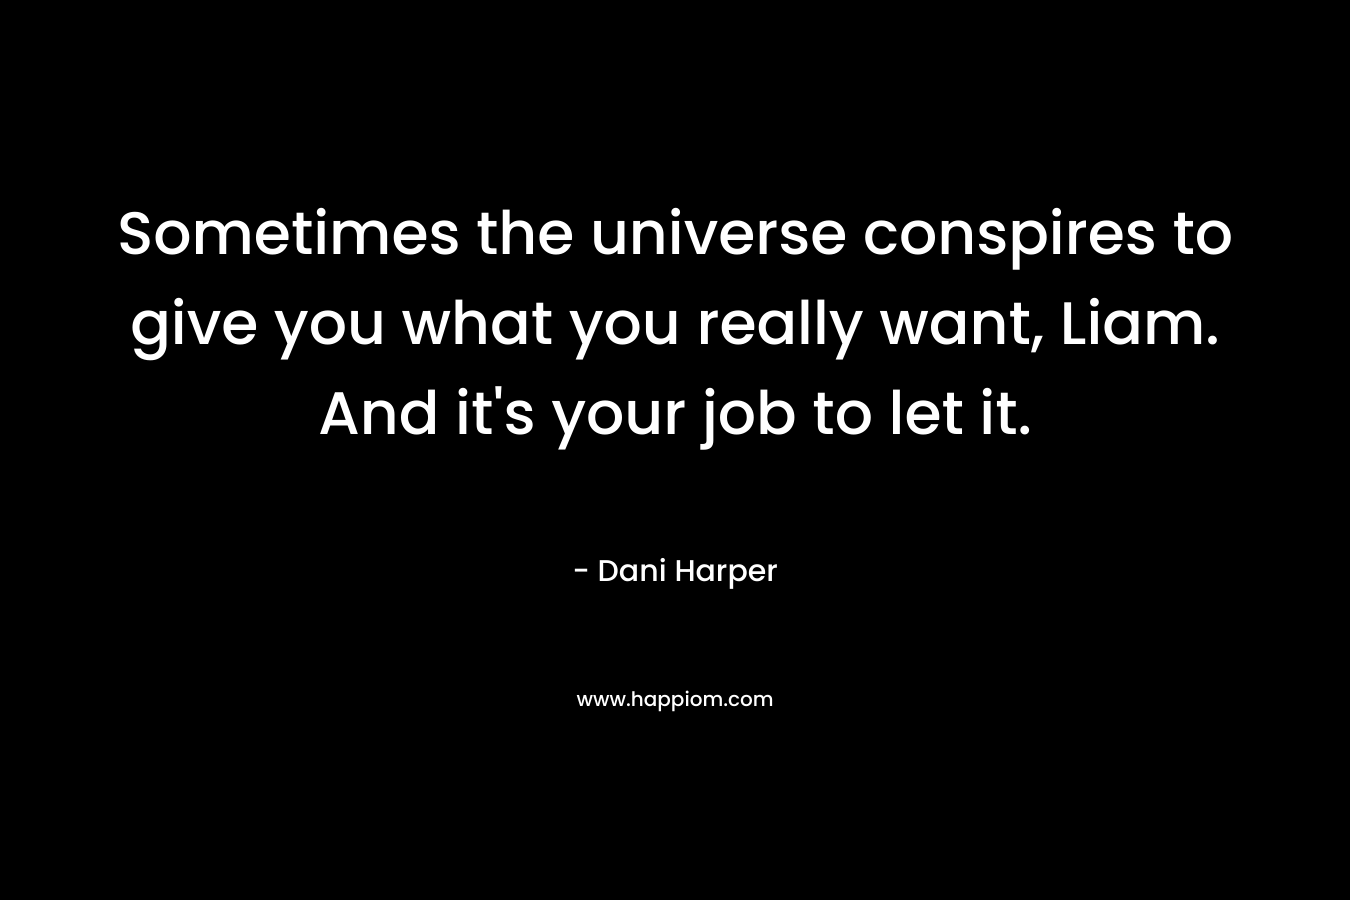 Sometimes the universe conspires to give you what you really want, Liam. And it’s your job to let it. – Dani Harper